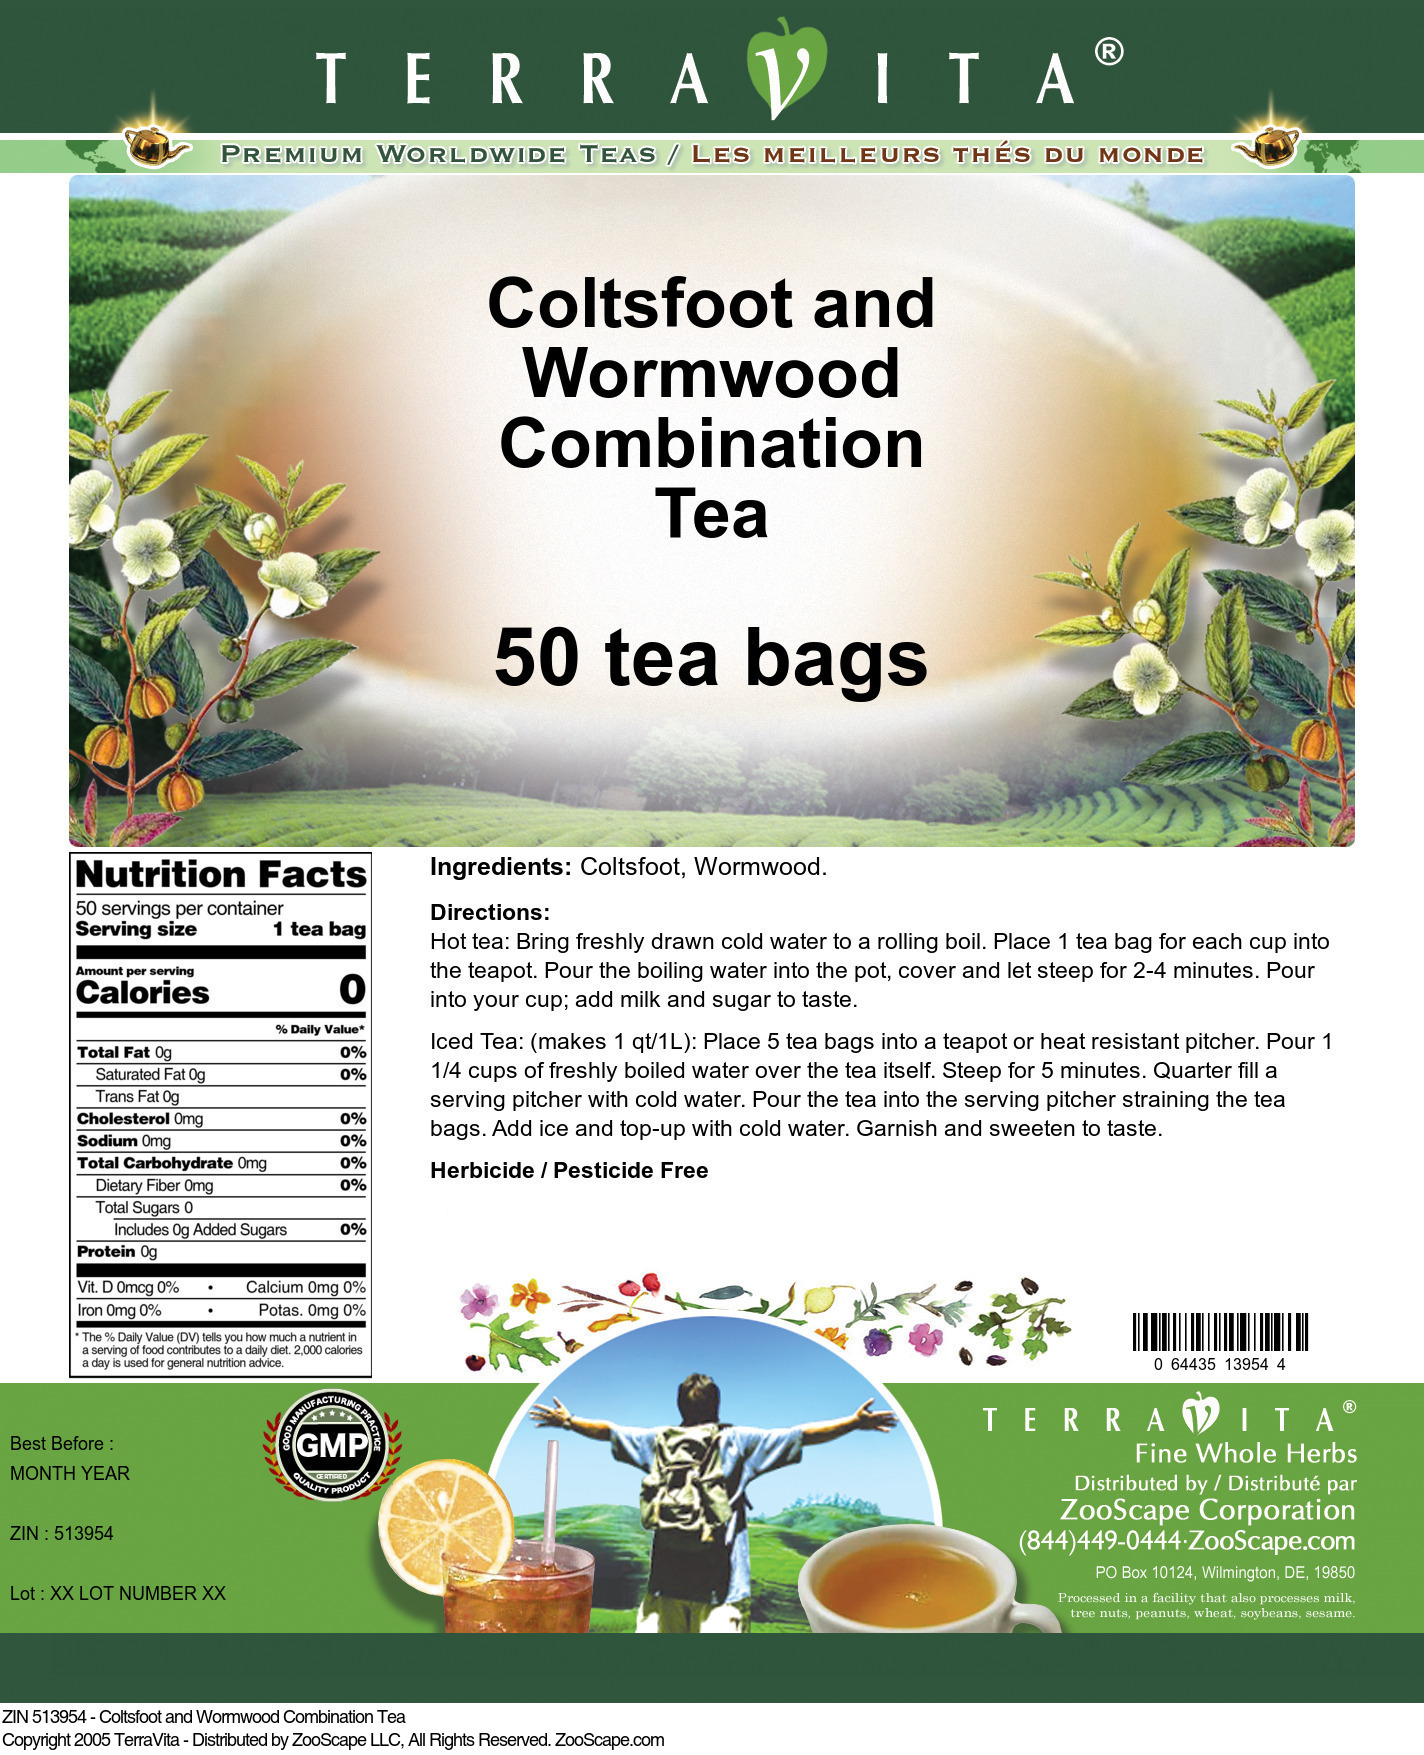 Coltsfoot and Wormwood Combination Tea - Label